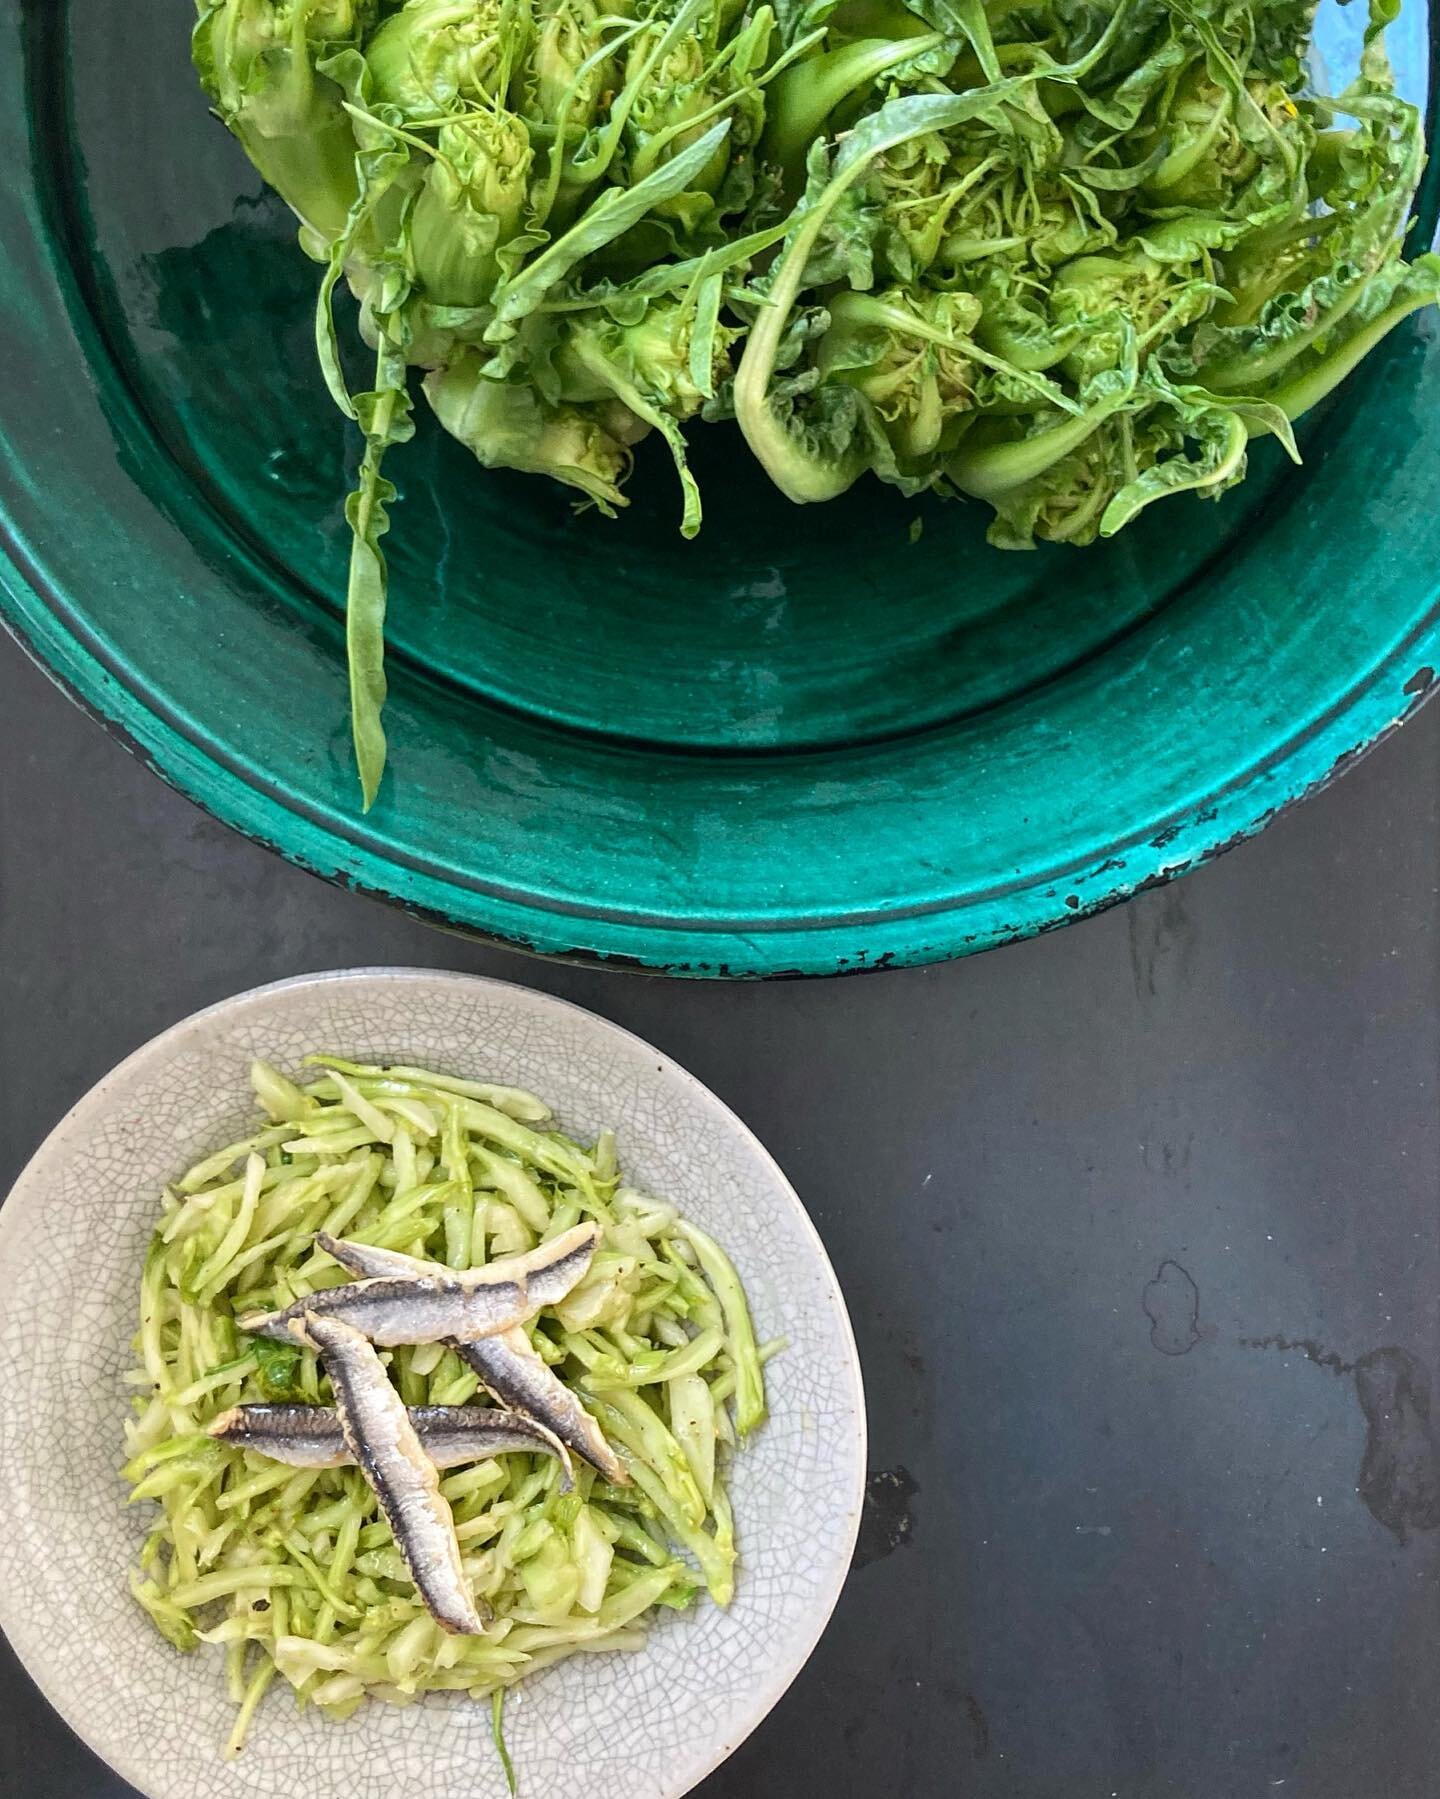 The upside of a cold wet California winter &hellip; Puntarelle into March &hellip; and an instant trip to Rome thanks to @freshrunfarm @cotogna_sf and @molinaridelicatessen 

#puntarelle 
#cucinaromana